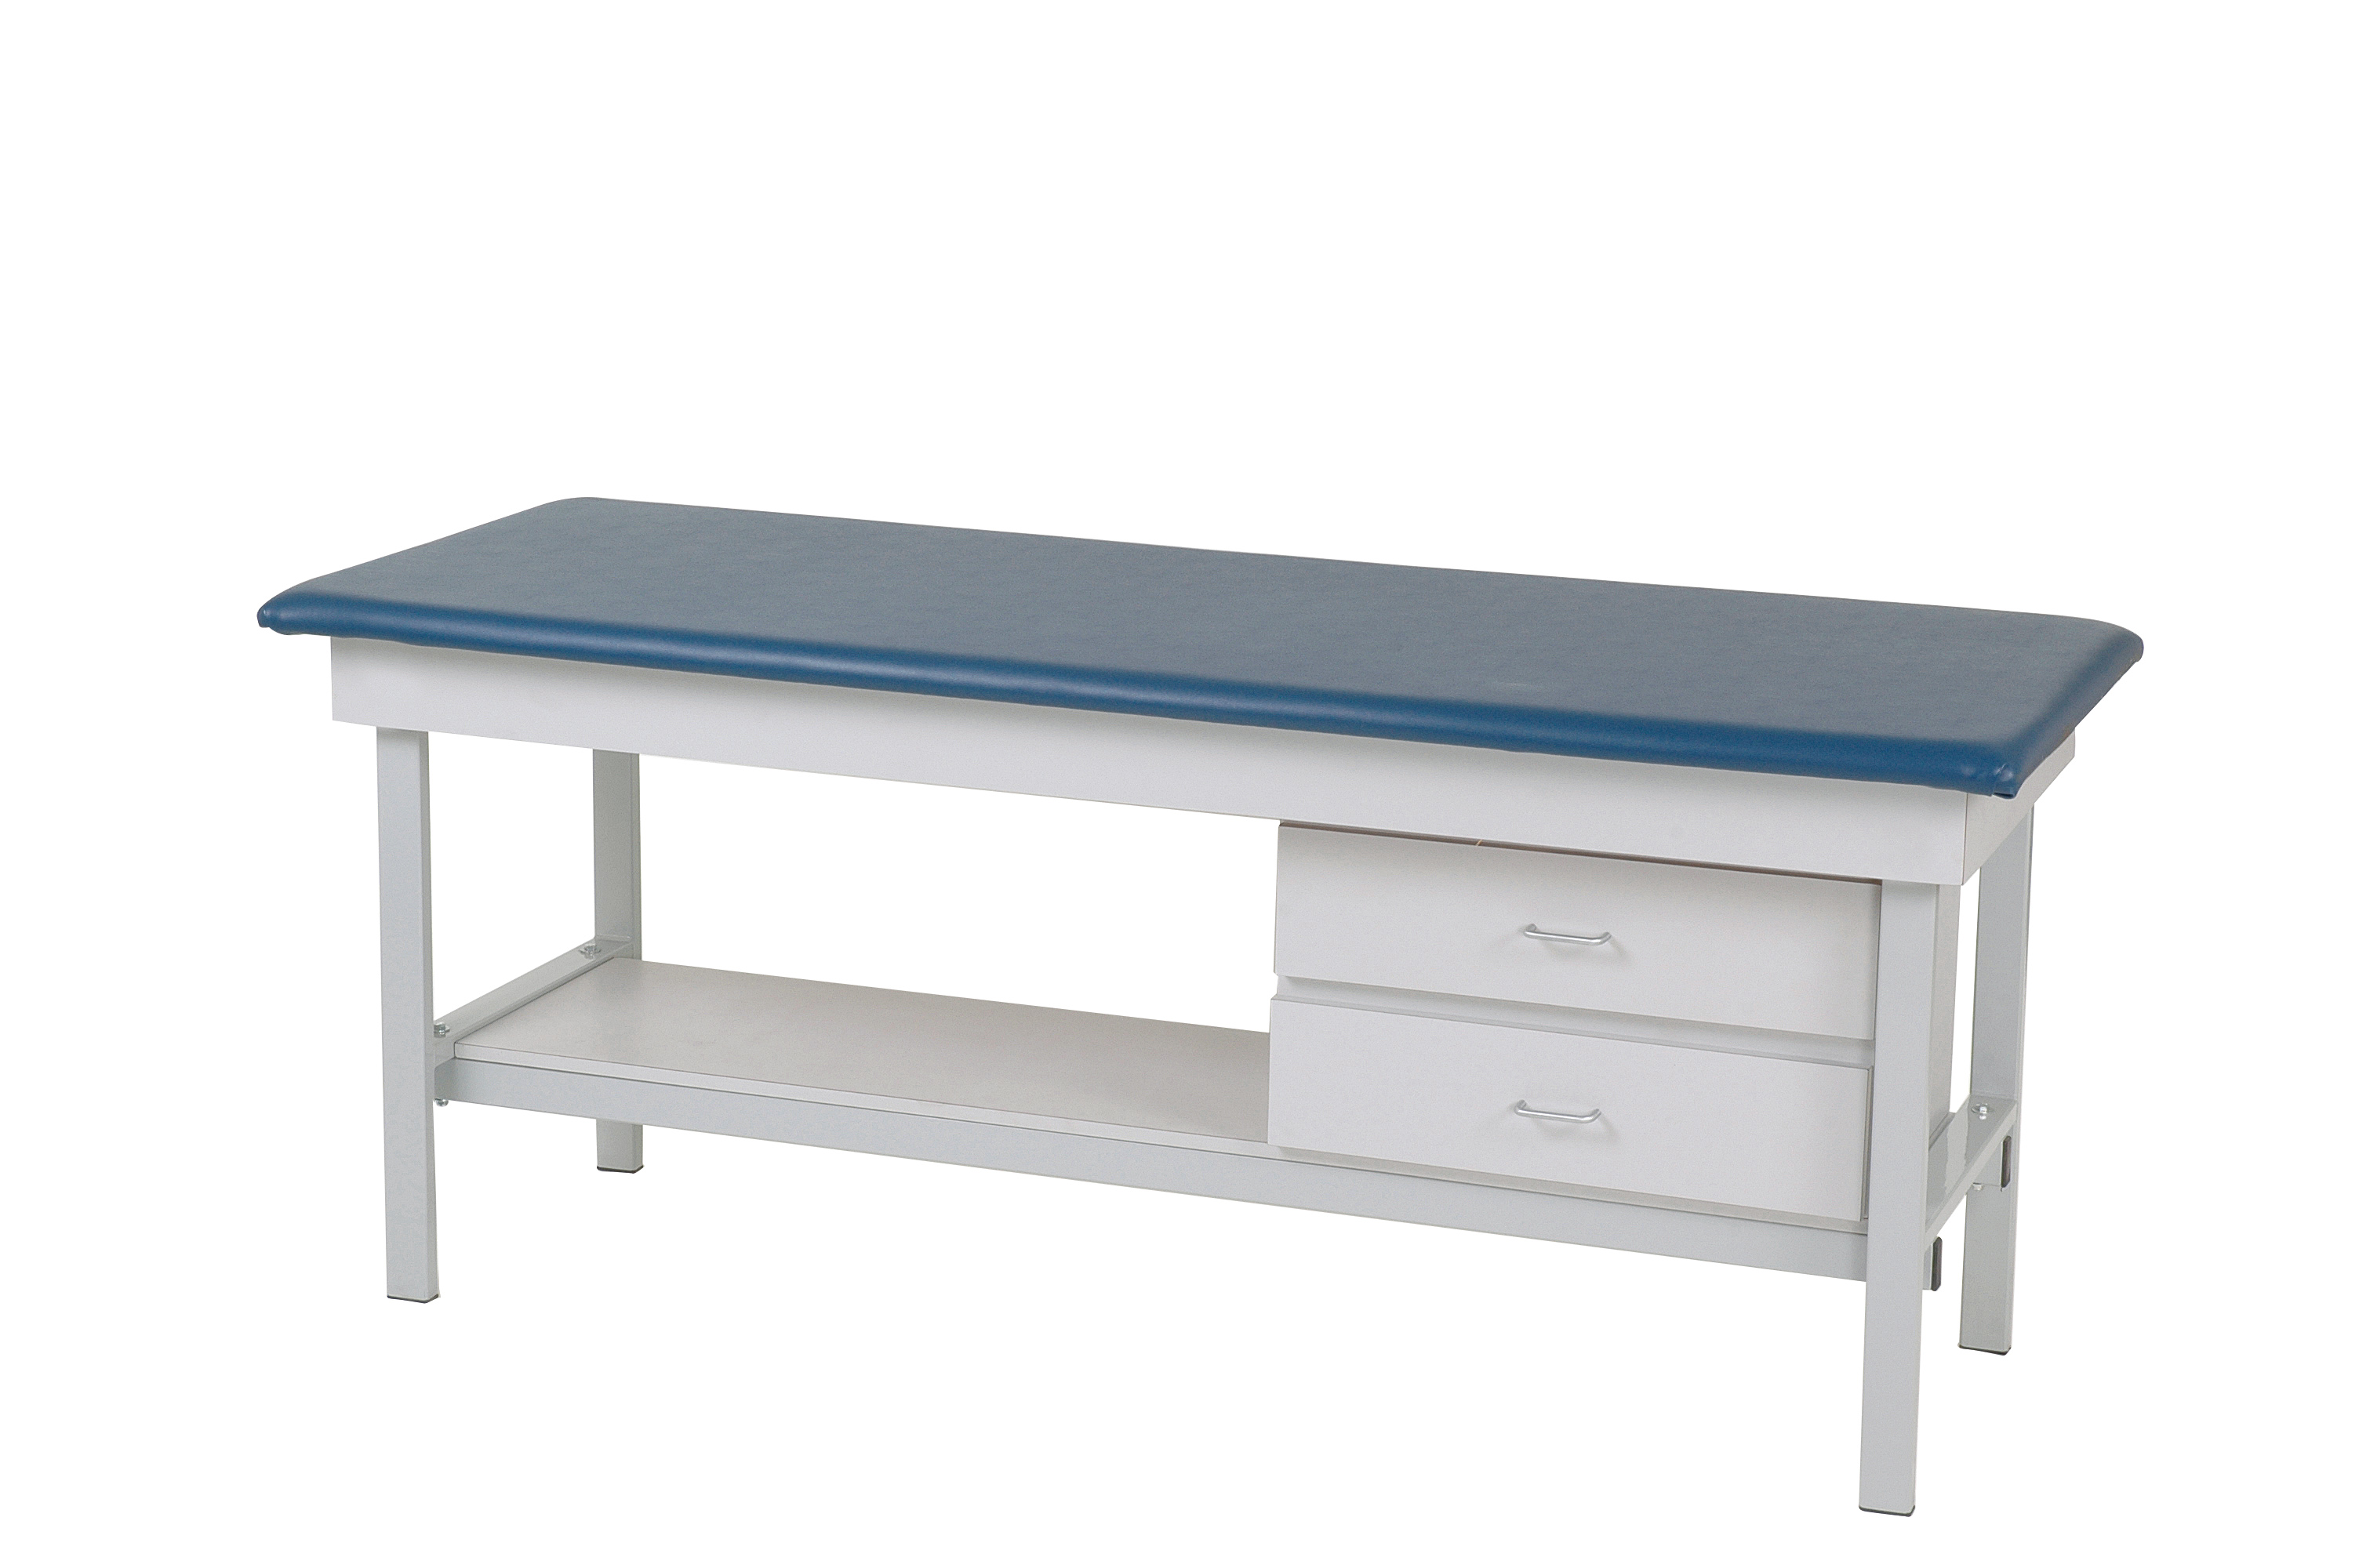 Exam Table with 2 Drawers 8010, treatment tables, steel frame, exam table